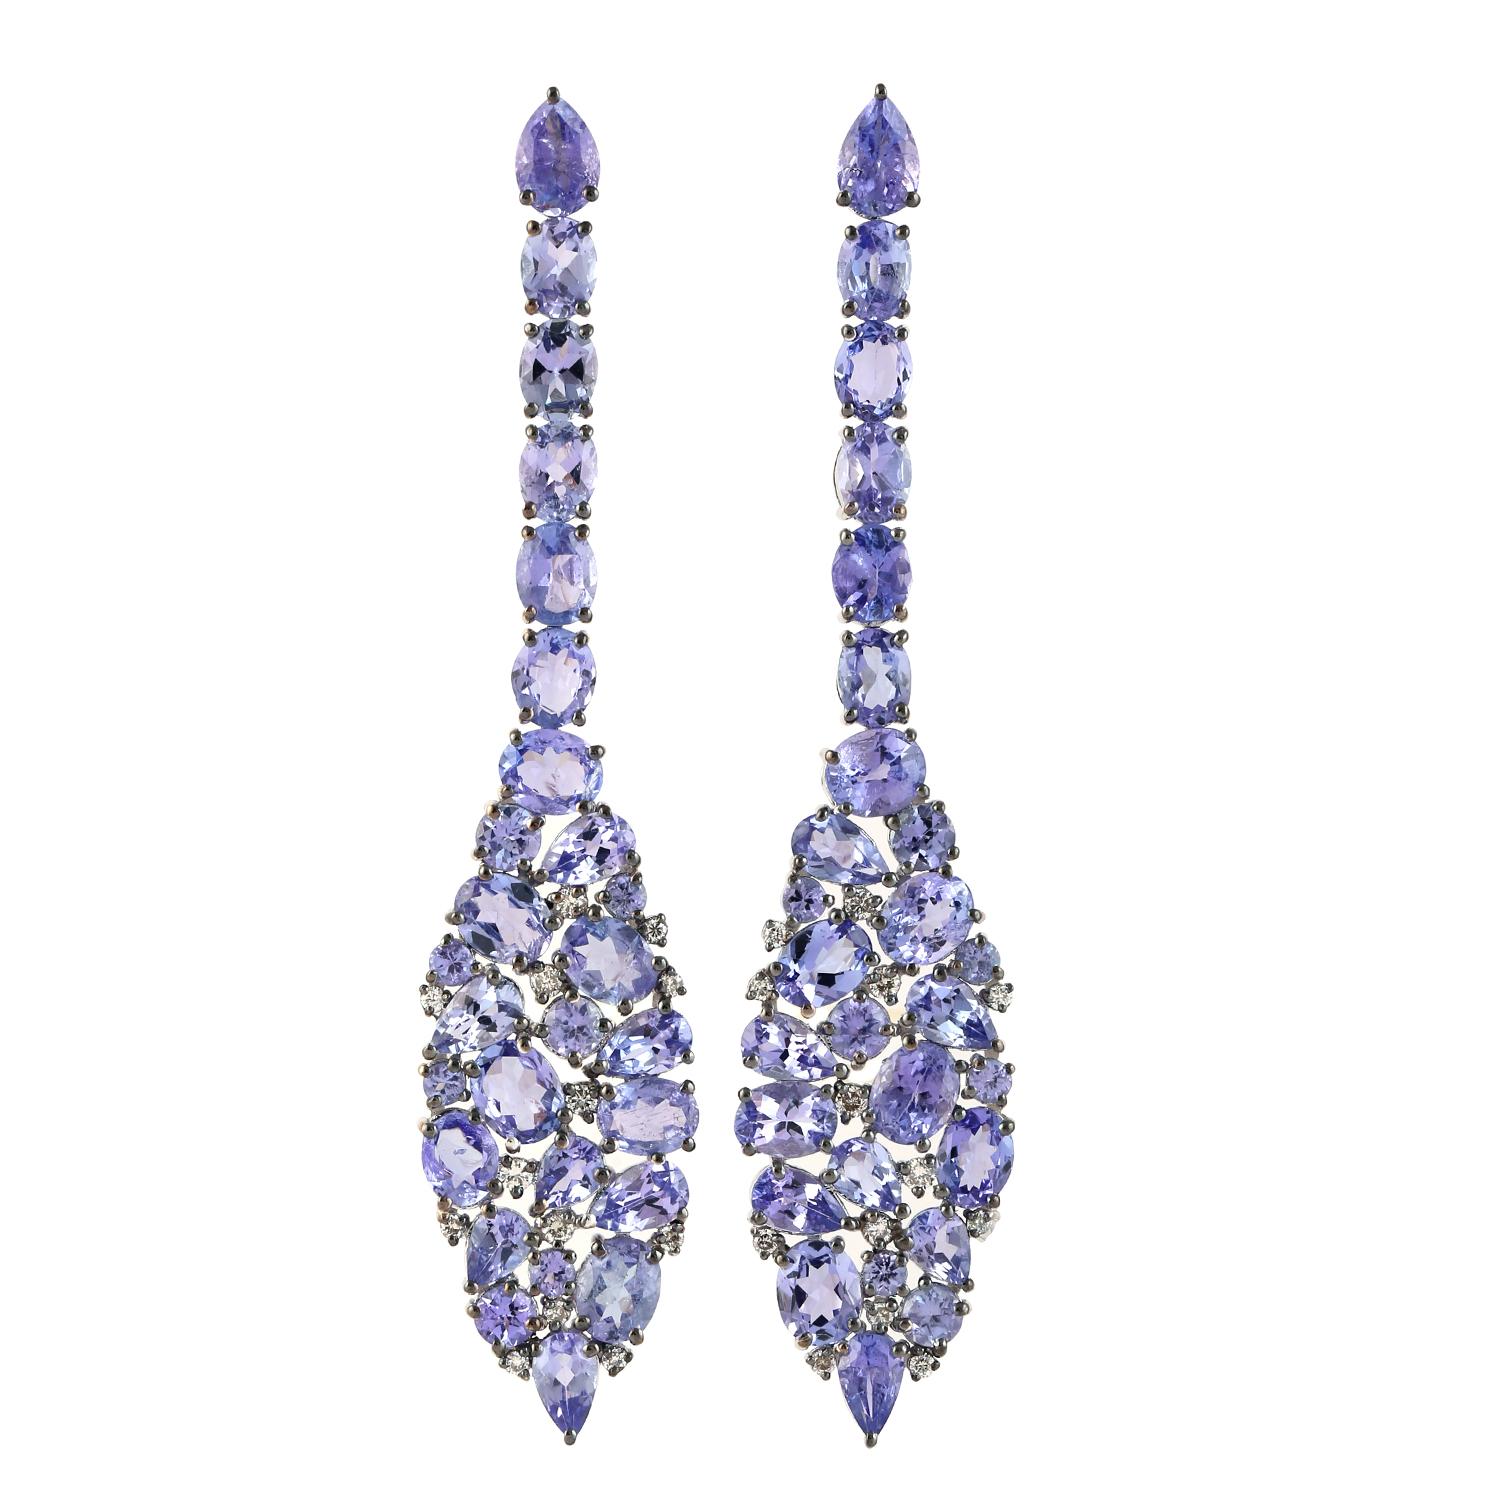 Mixed Cut Rosebud Shaped Tanzanite Earrings with Diamonds Made in 18k White Gold For Sale